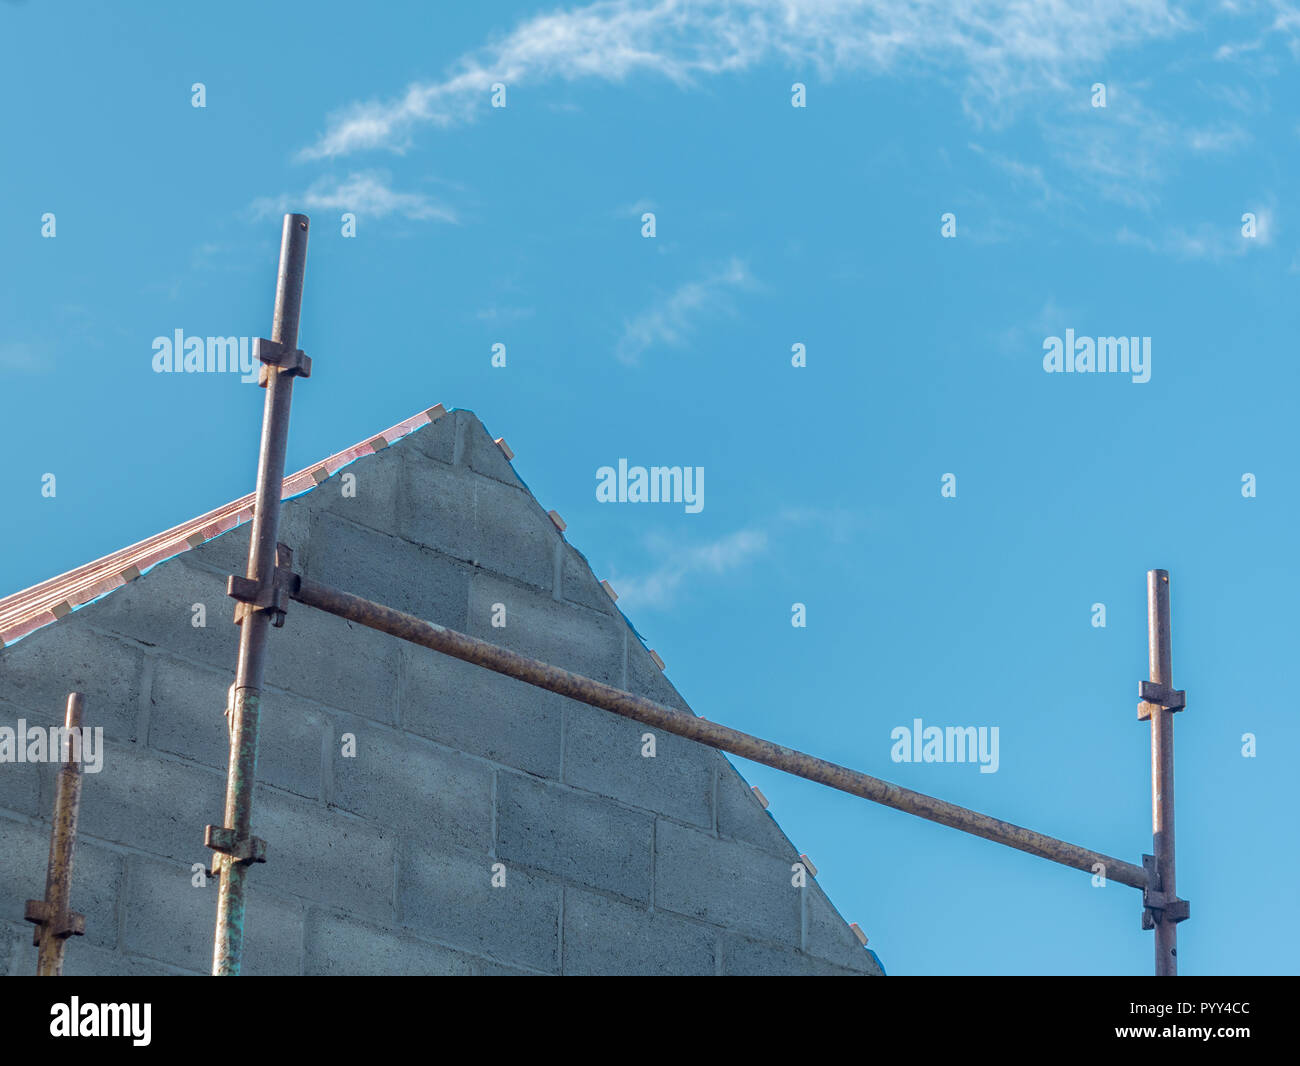 Gable end of a new-build home with scaffolding visible. Against blue sky. For UK construction sector. Stock Photo